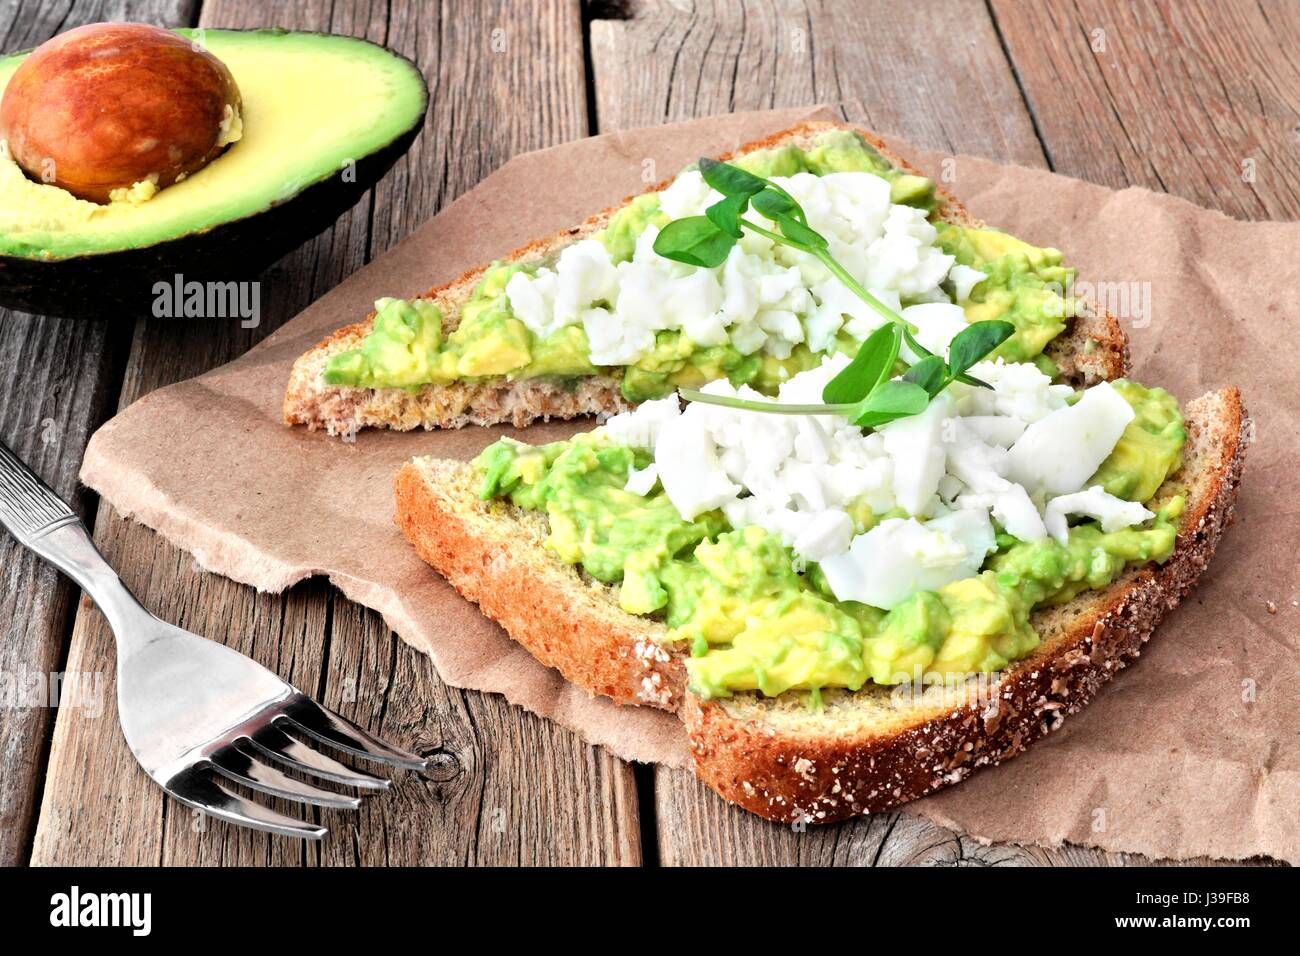 Avocado toast with egg whites and pea shoots on paper against a rustic wood background Stock Photo